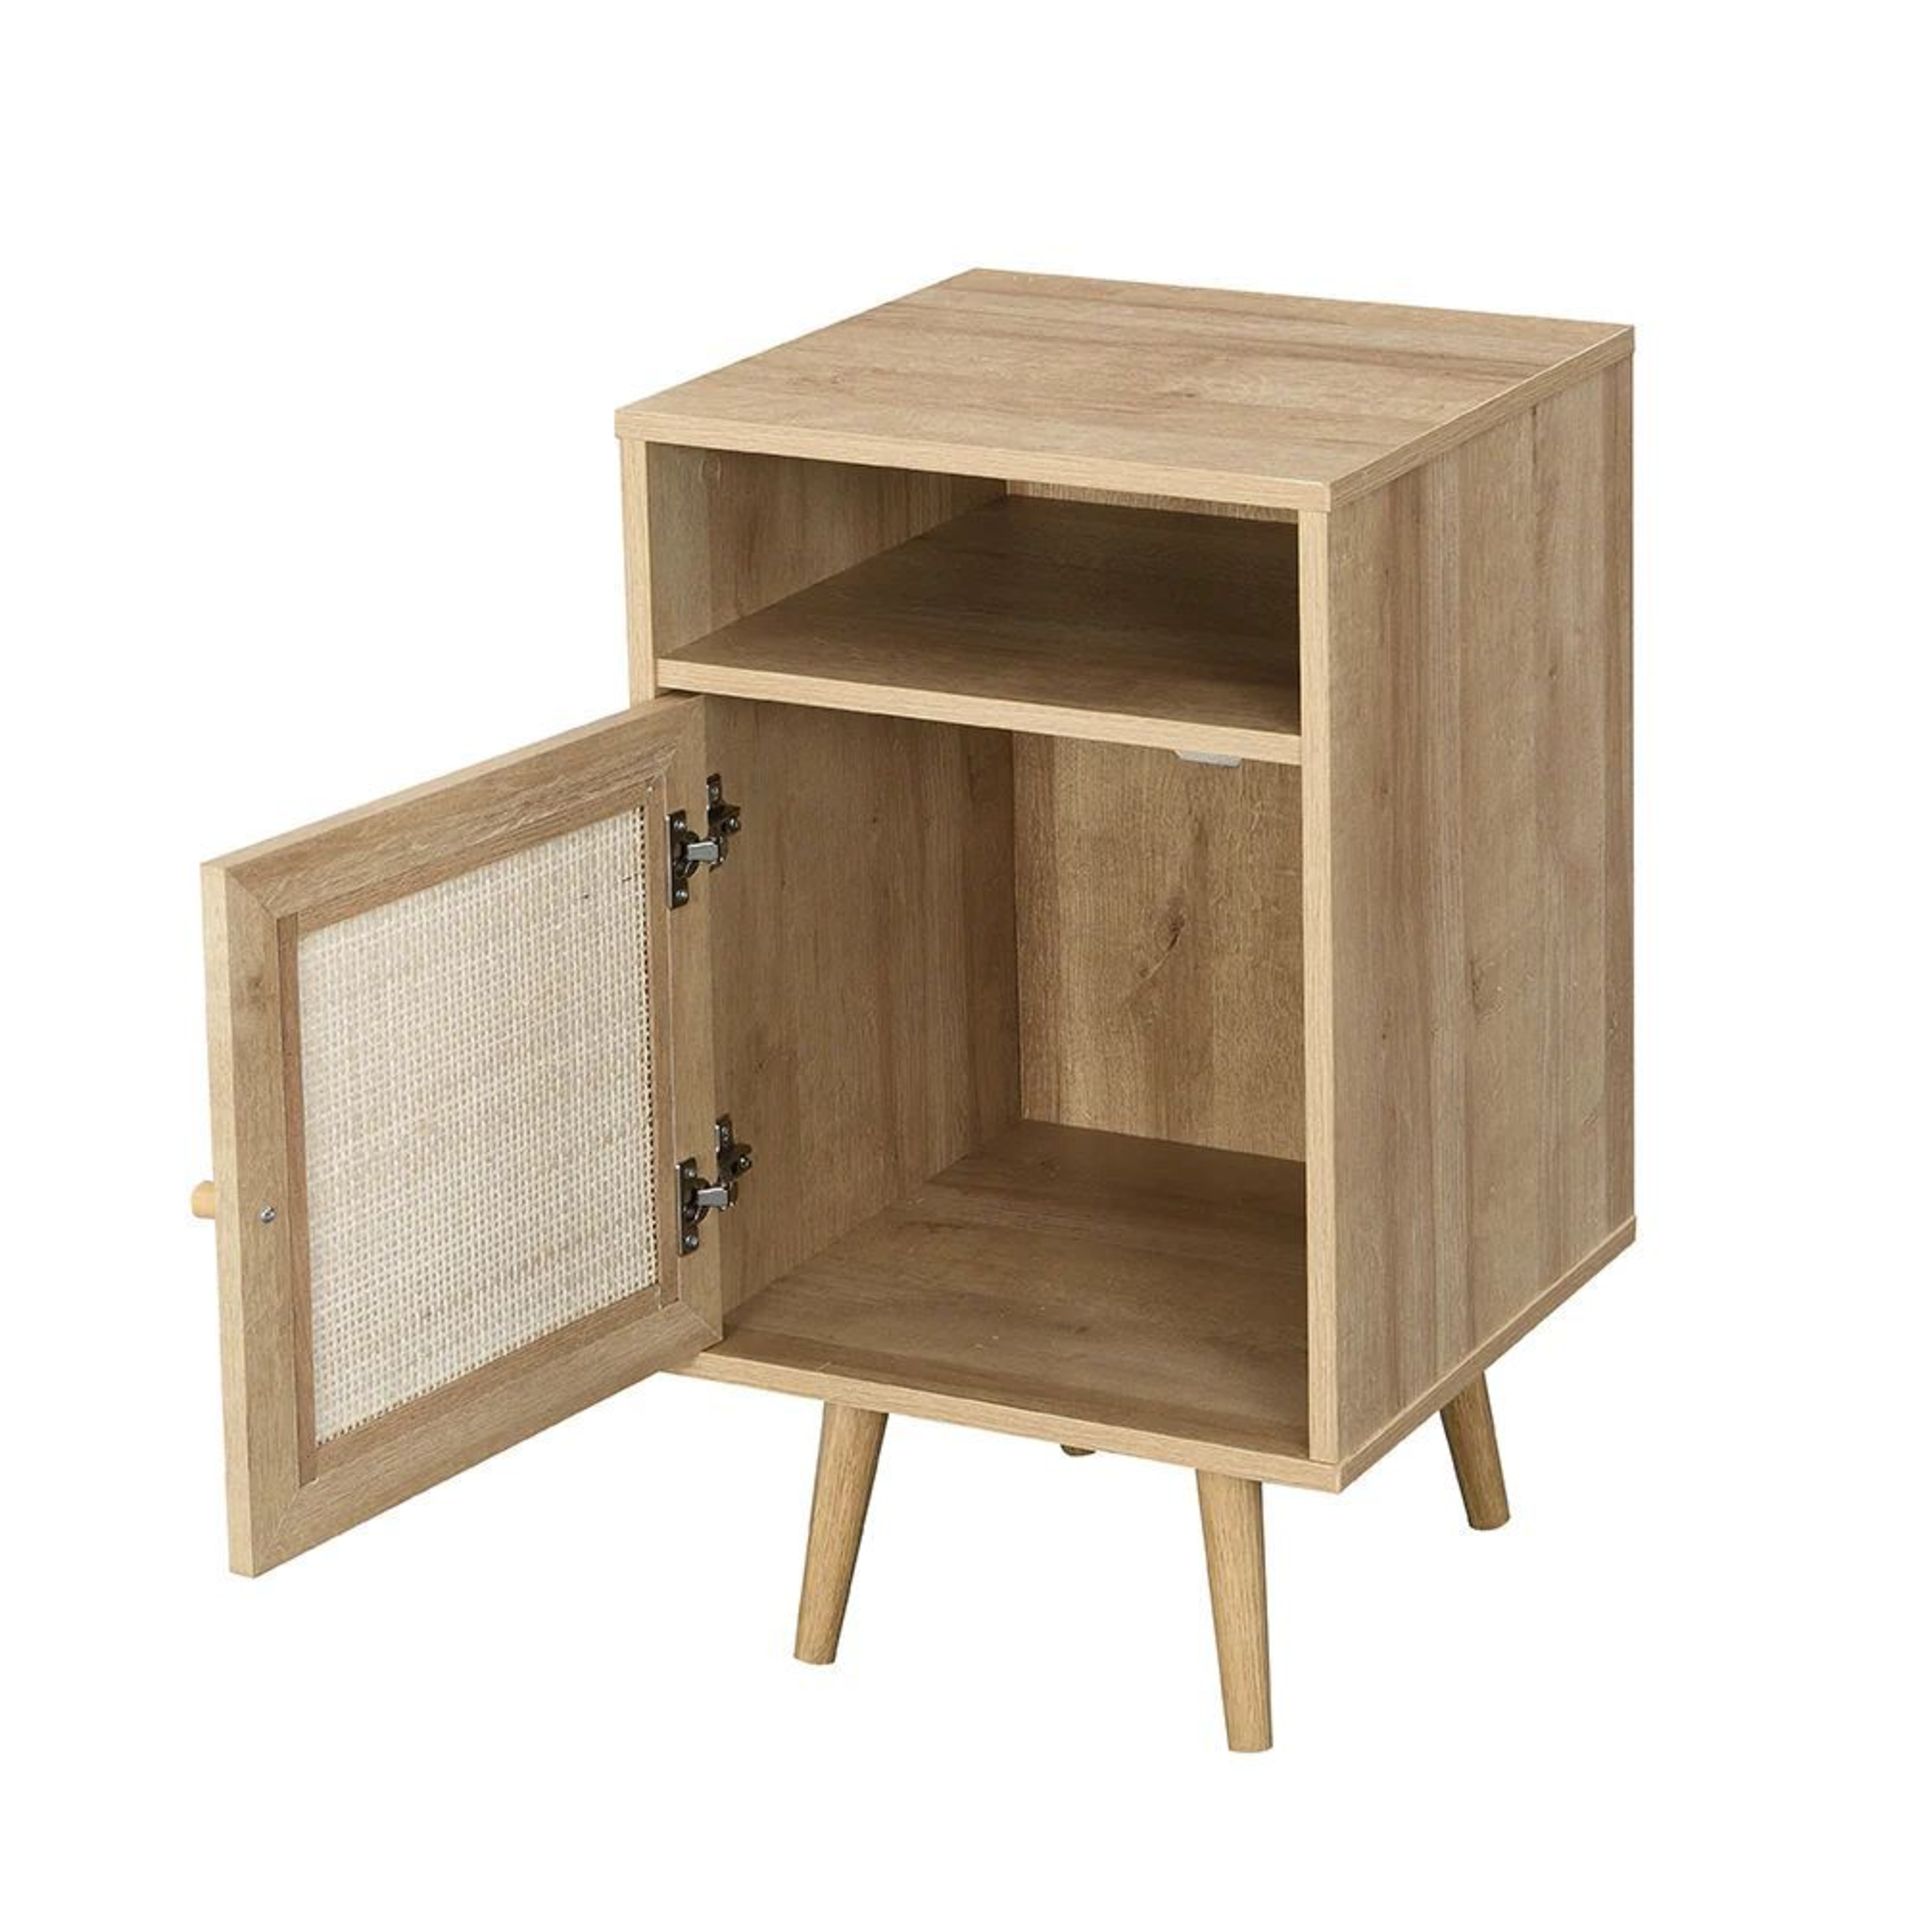 Frances Woven Rattan 1-Door Bedside Table in Natural Colour. - ER29. RRP £149.99. Our Frances - Image 4 of 4